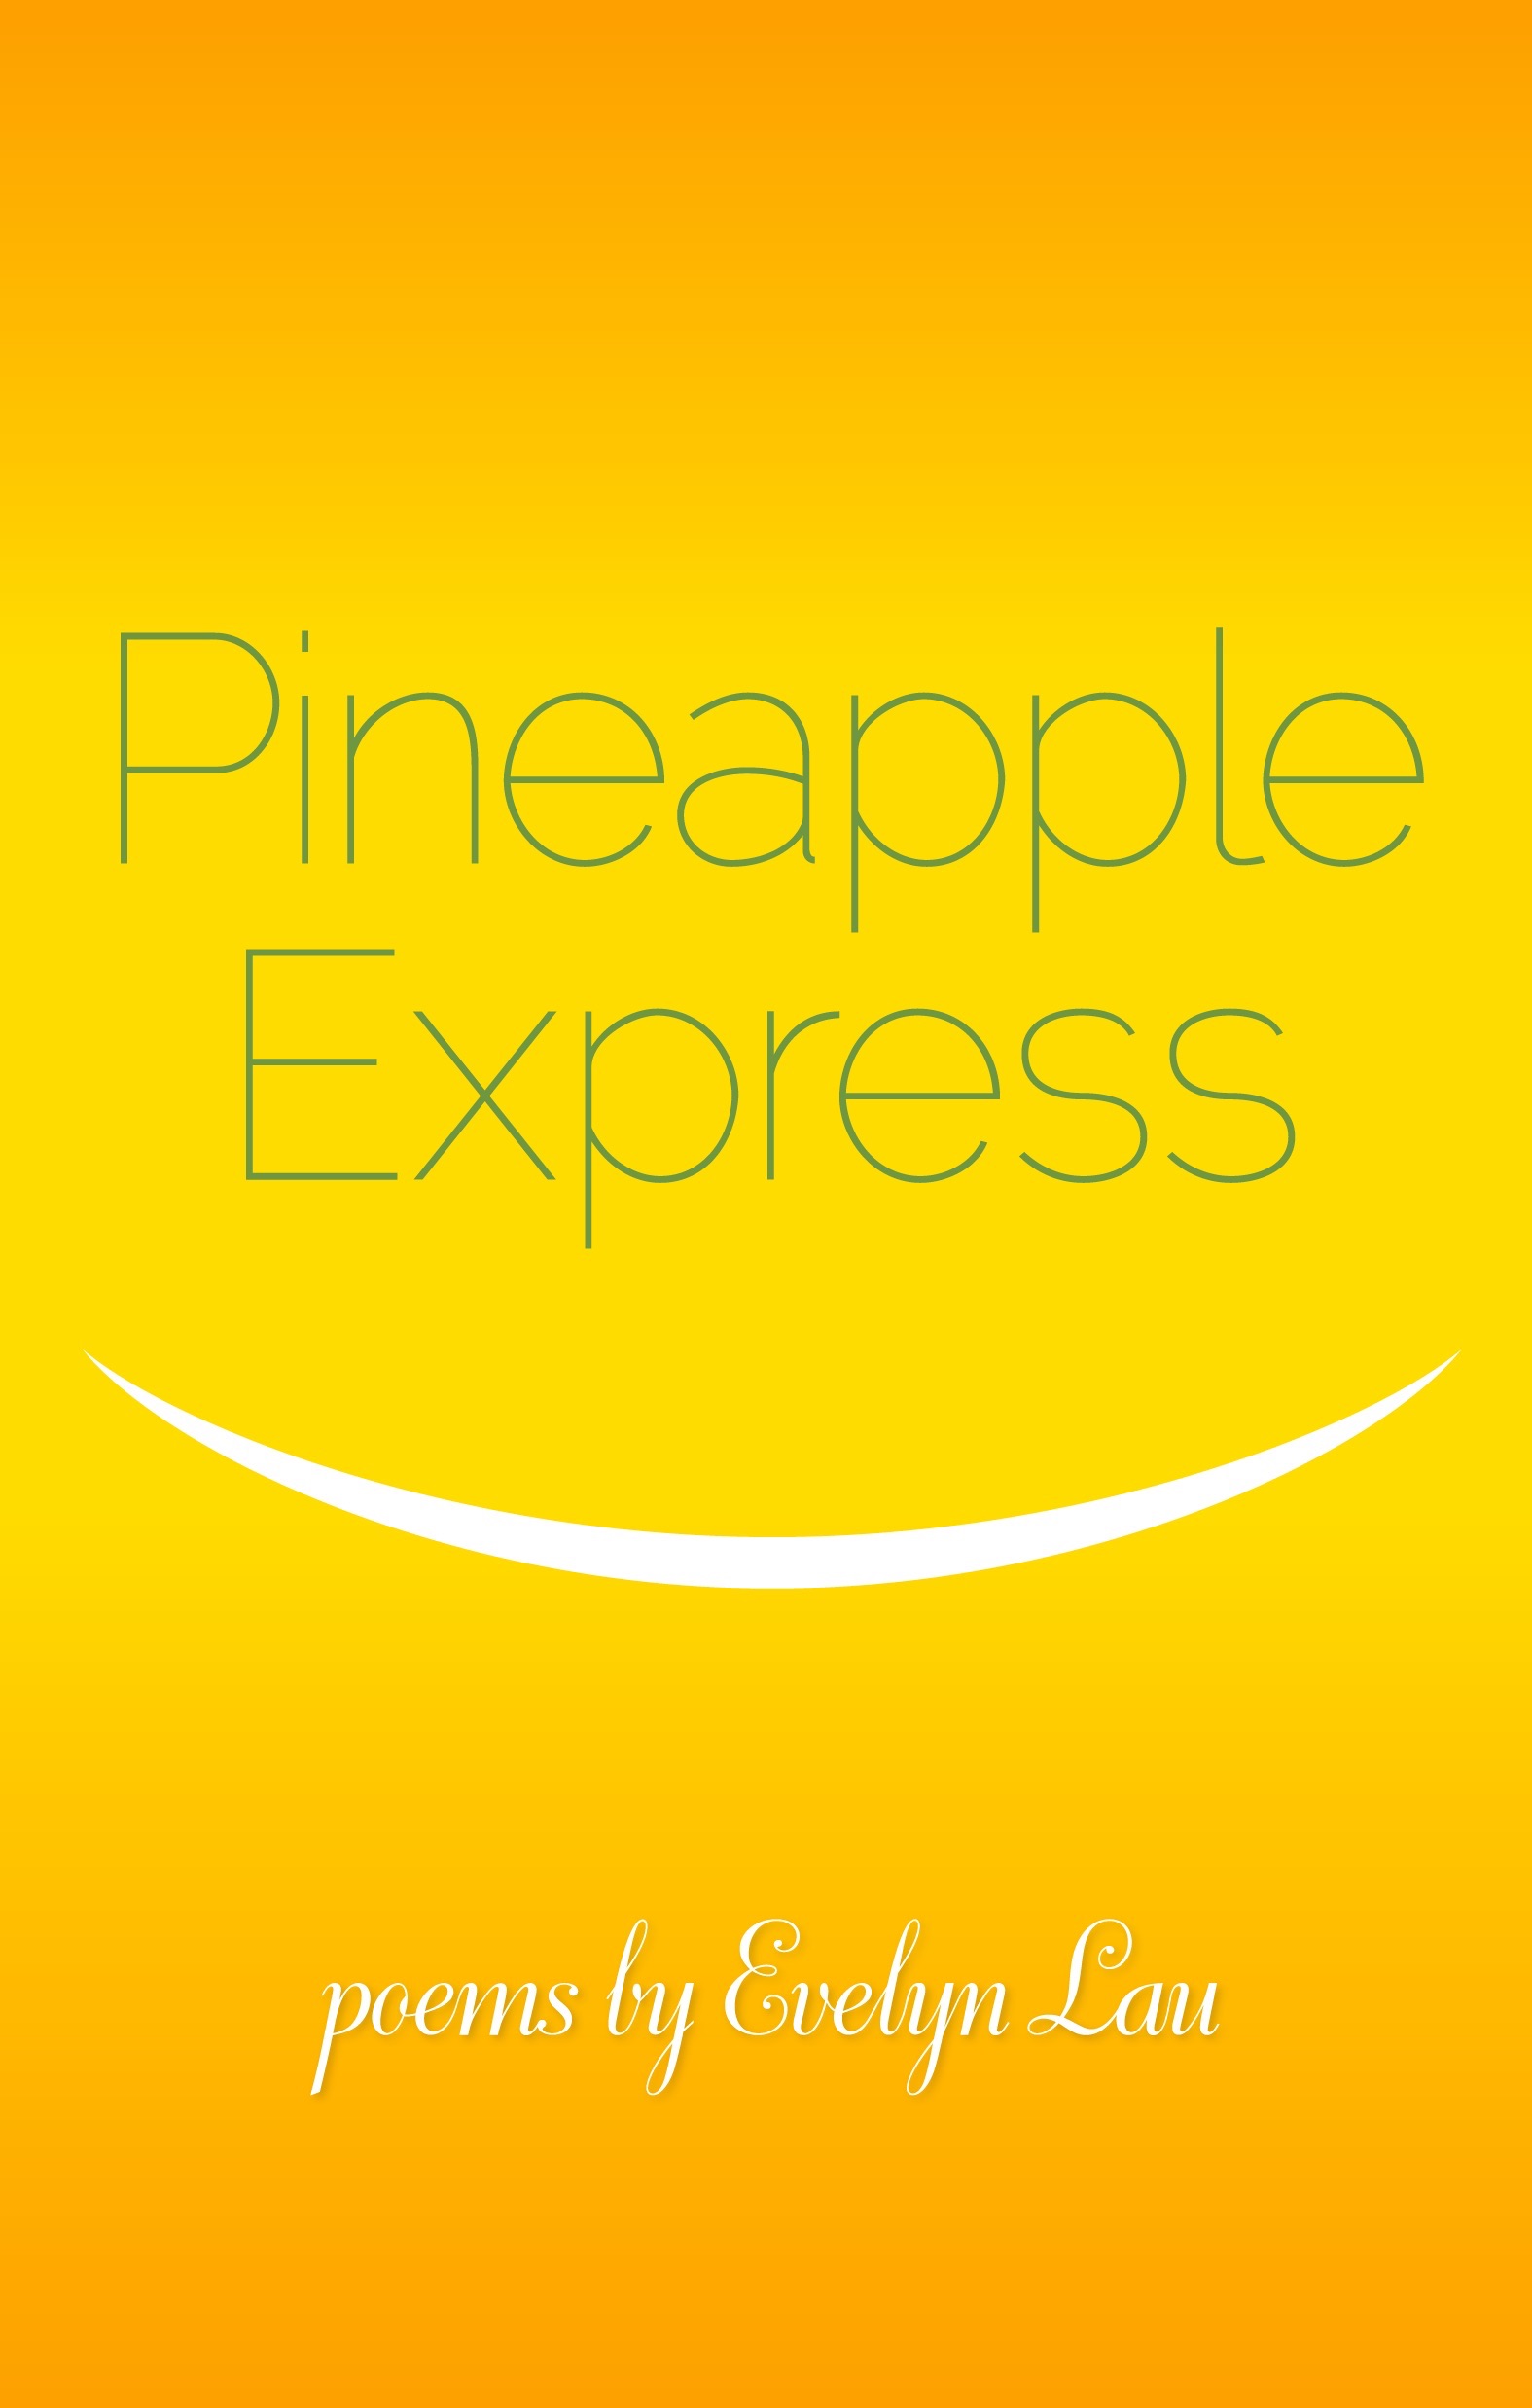 Pineapple-express-/-by-Evelyn-Lau.